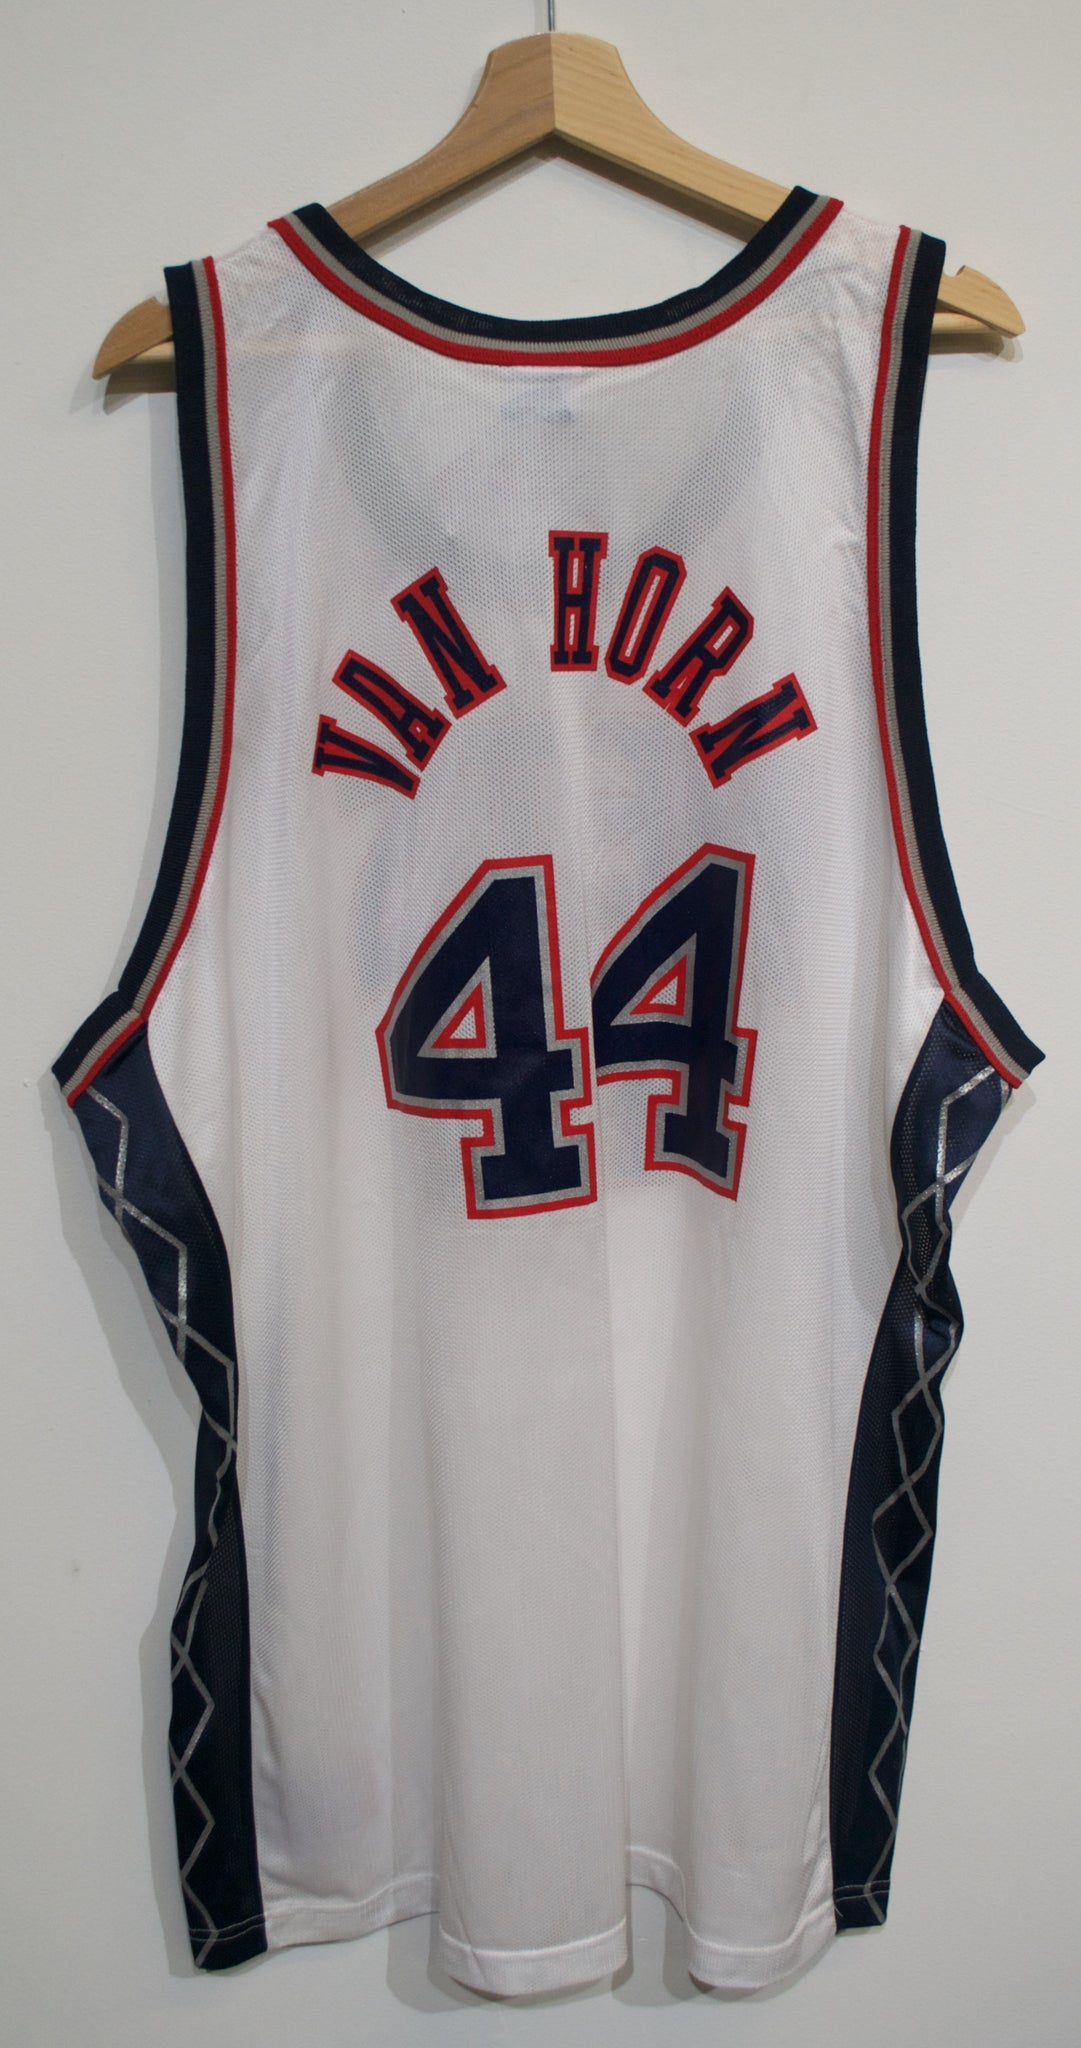 Survival of the Flyest — New jersey nets van horn champion jersey